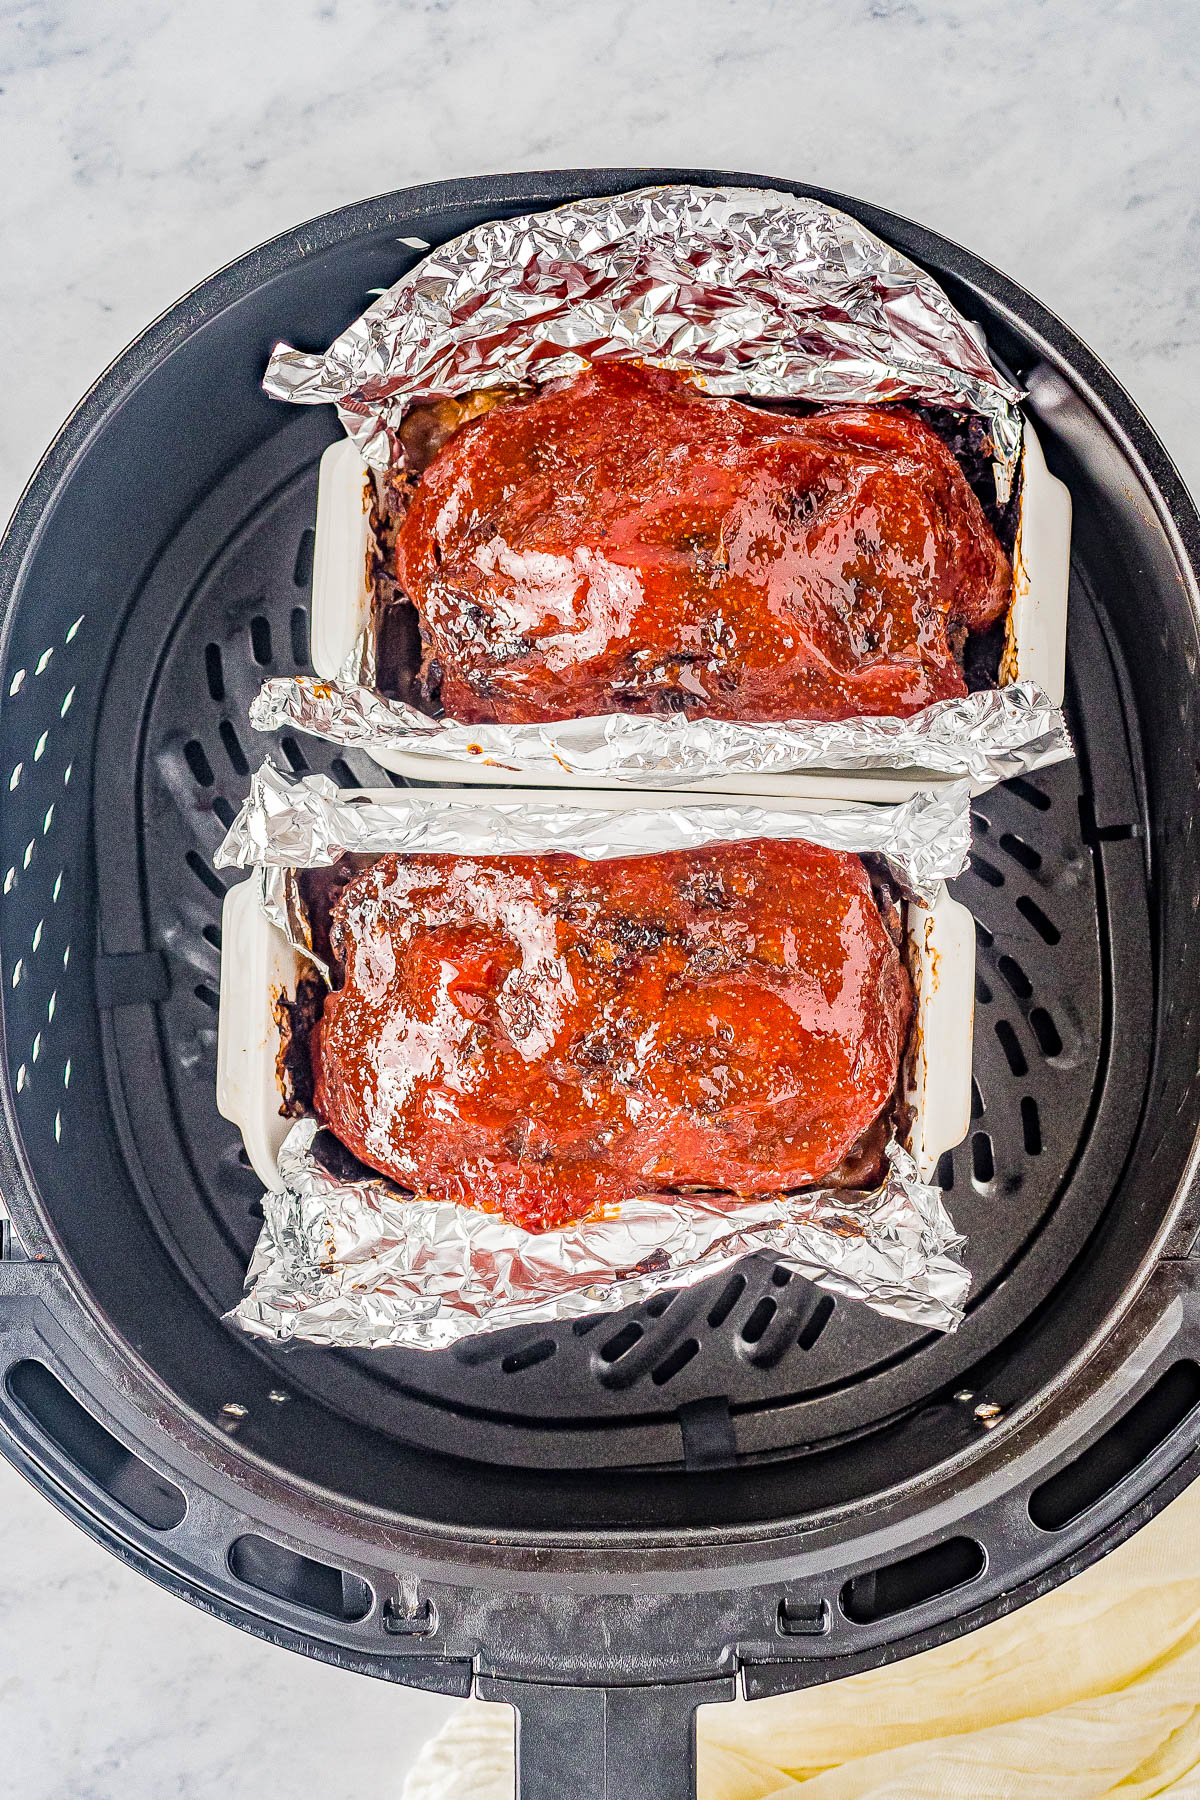 Air Fryer Meatloaf - Learn how to make AMAZING meatloaf in your air fryer! It cooks in half the time that it does in the oven, has perfectly crisped edges, and the interior stays juicy and moist! I use ground turkey or ground chicken to keep it HEALTHIER but ground pork, ground sausage, or ground beef can be used! Oven baking instructions also provided.